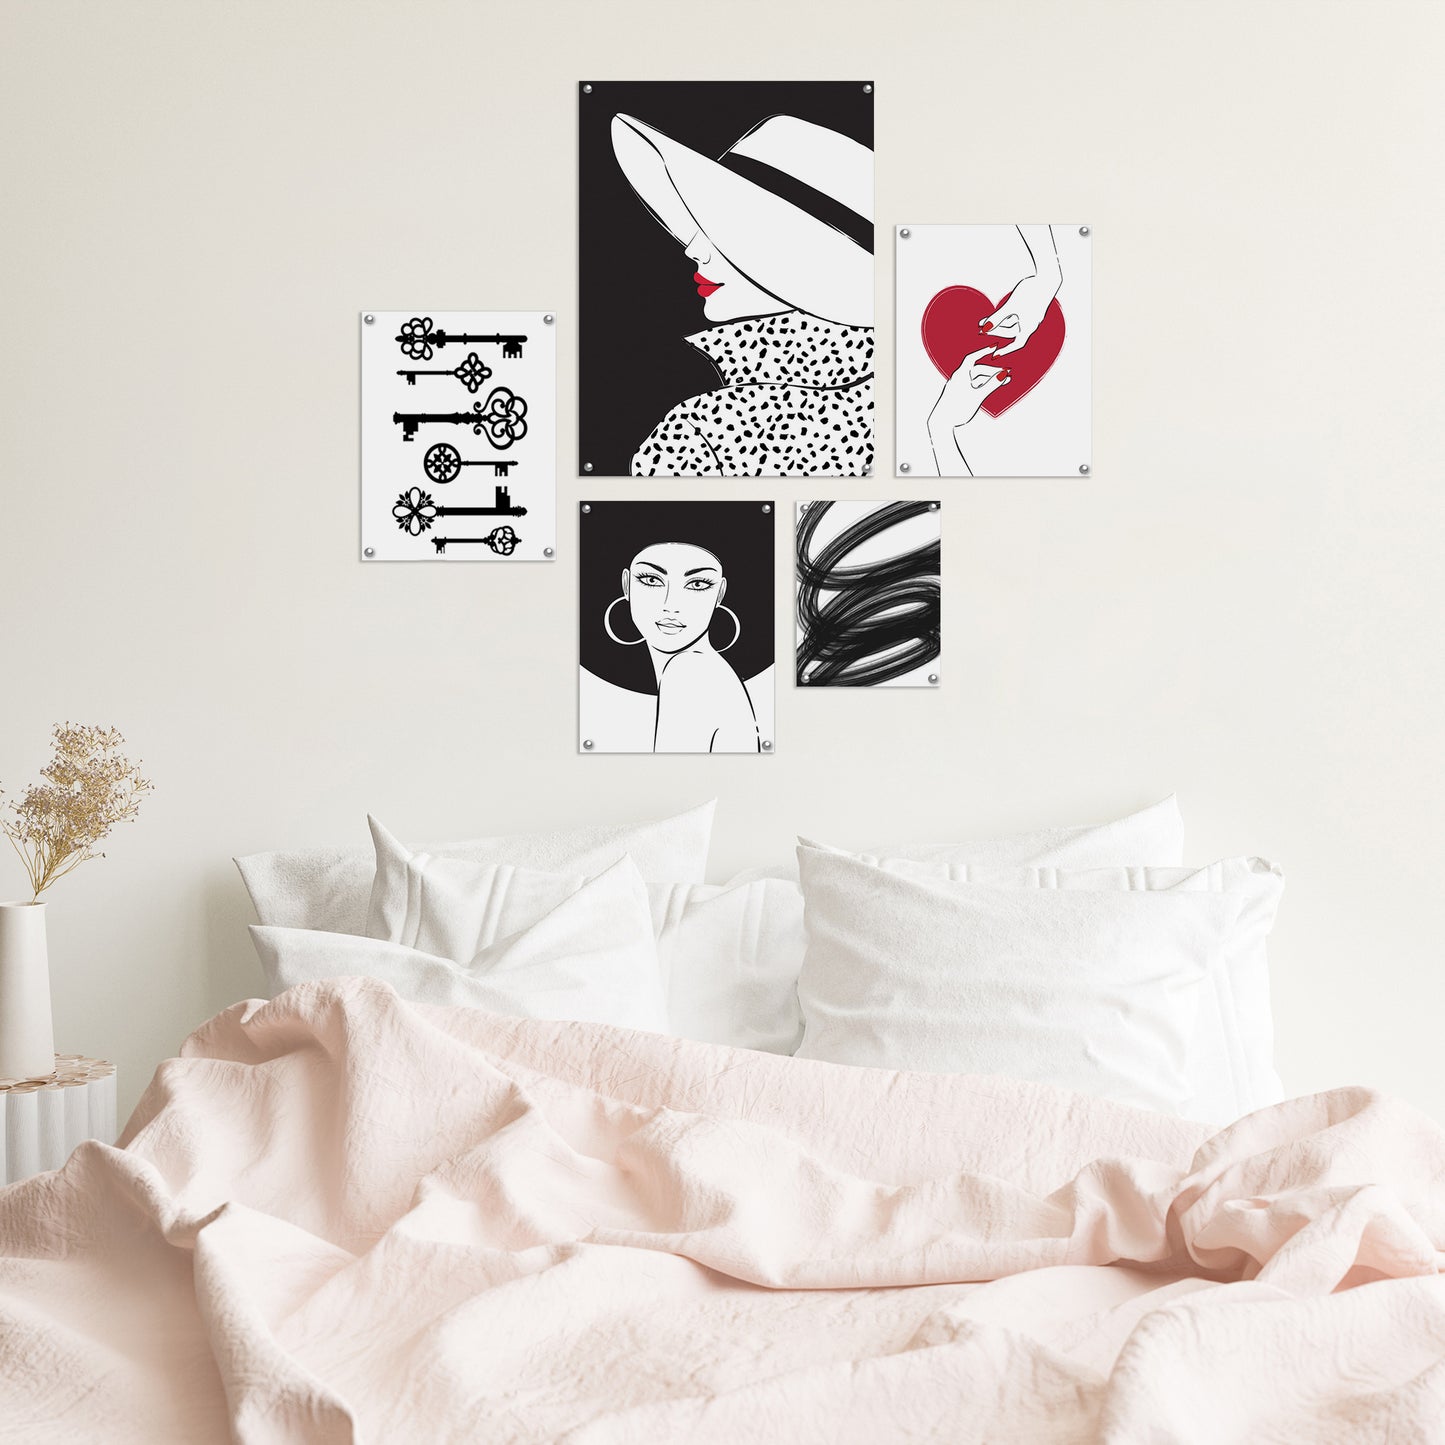 5 Piece Poster Gallery Wall Art Set - Black, White & Red Abstract Feminine Wire Art - Print